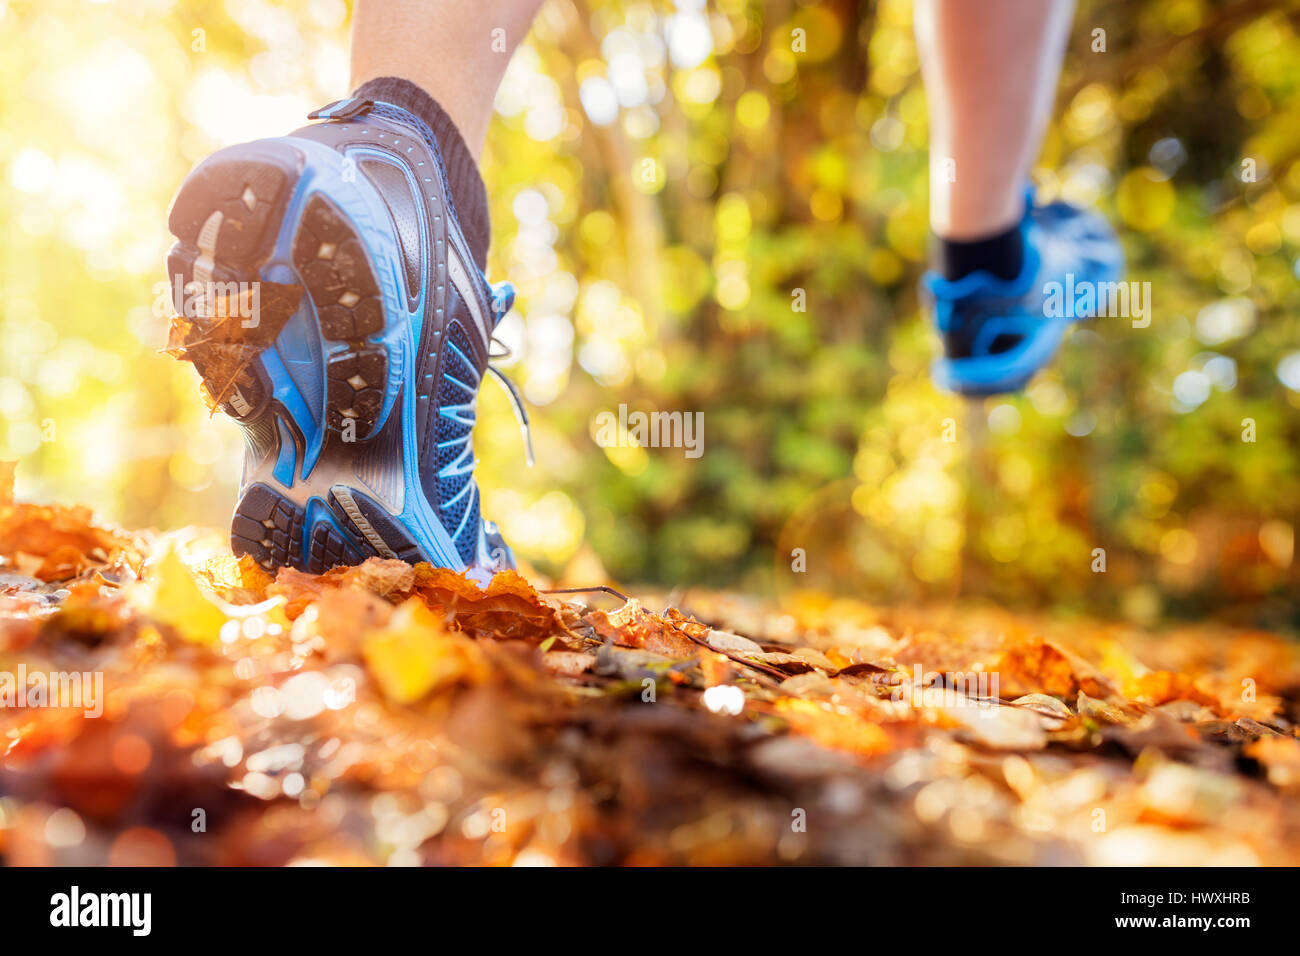 Outdoor cross-country running in summer autumn sunshine concept for exercising, fitness and healthy lifestyle Stock Photo